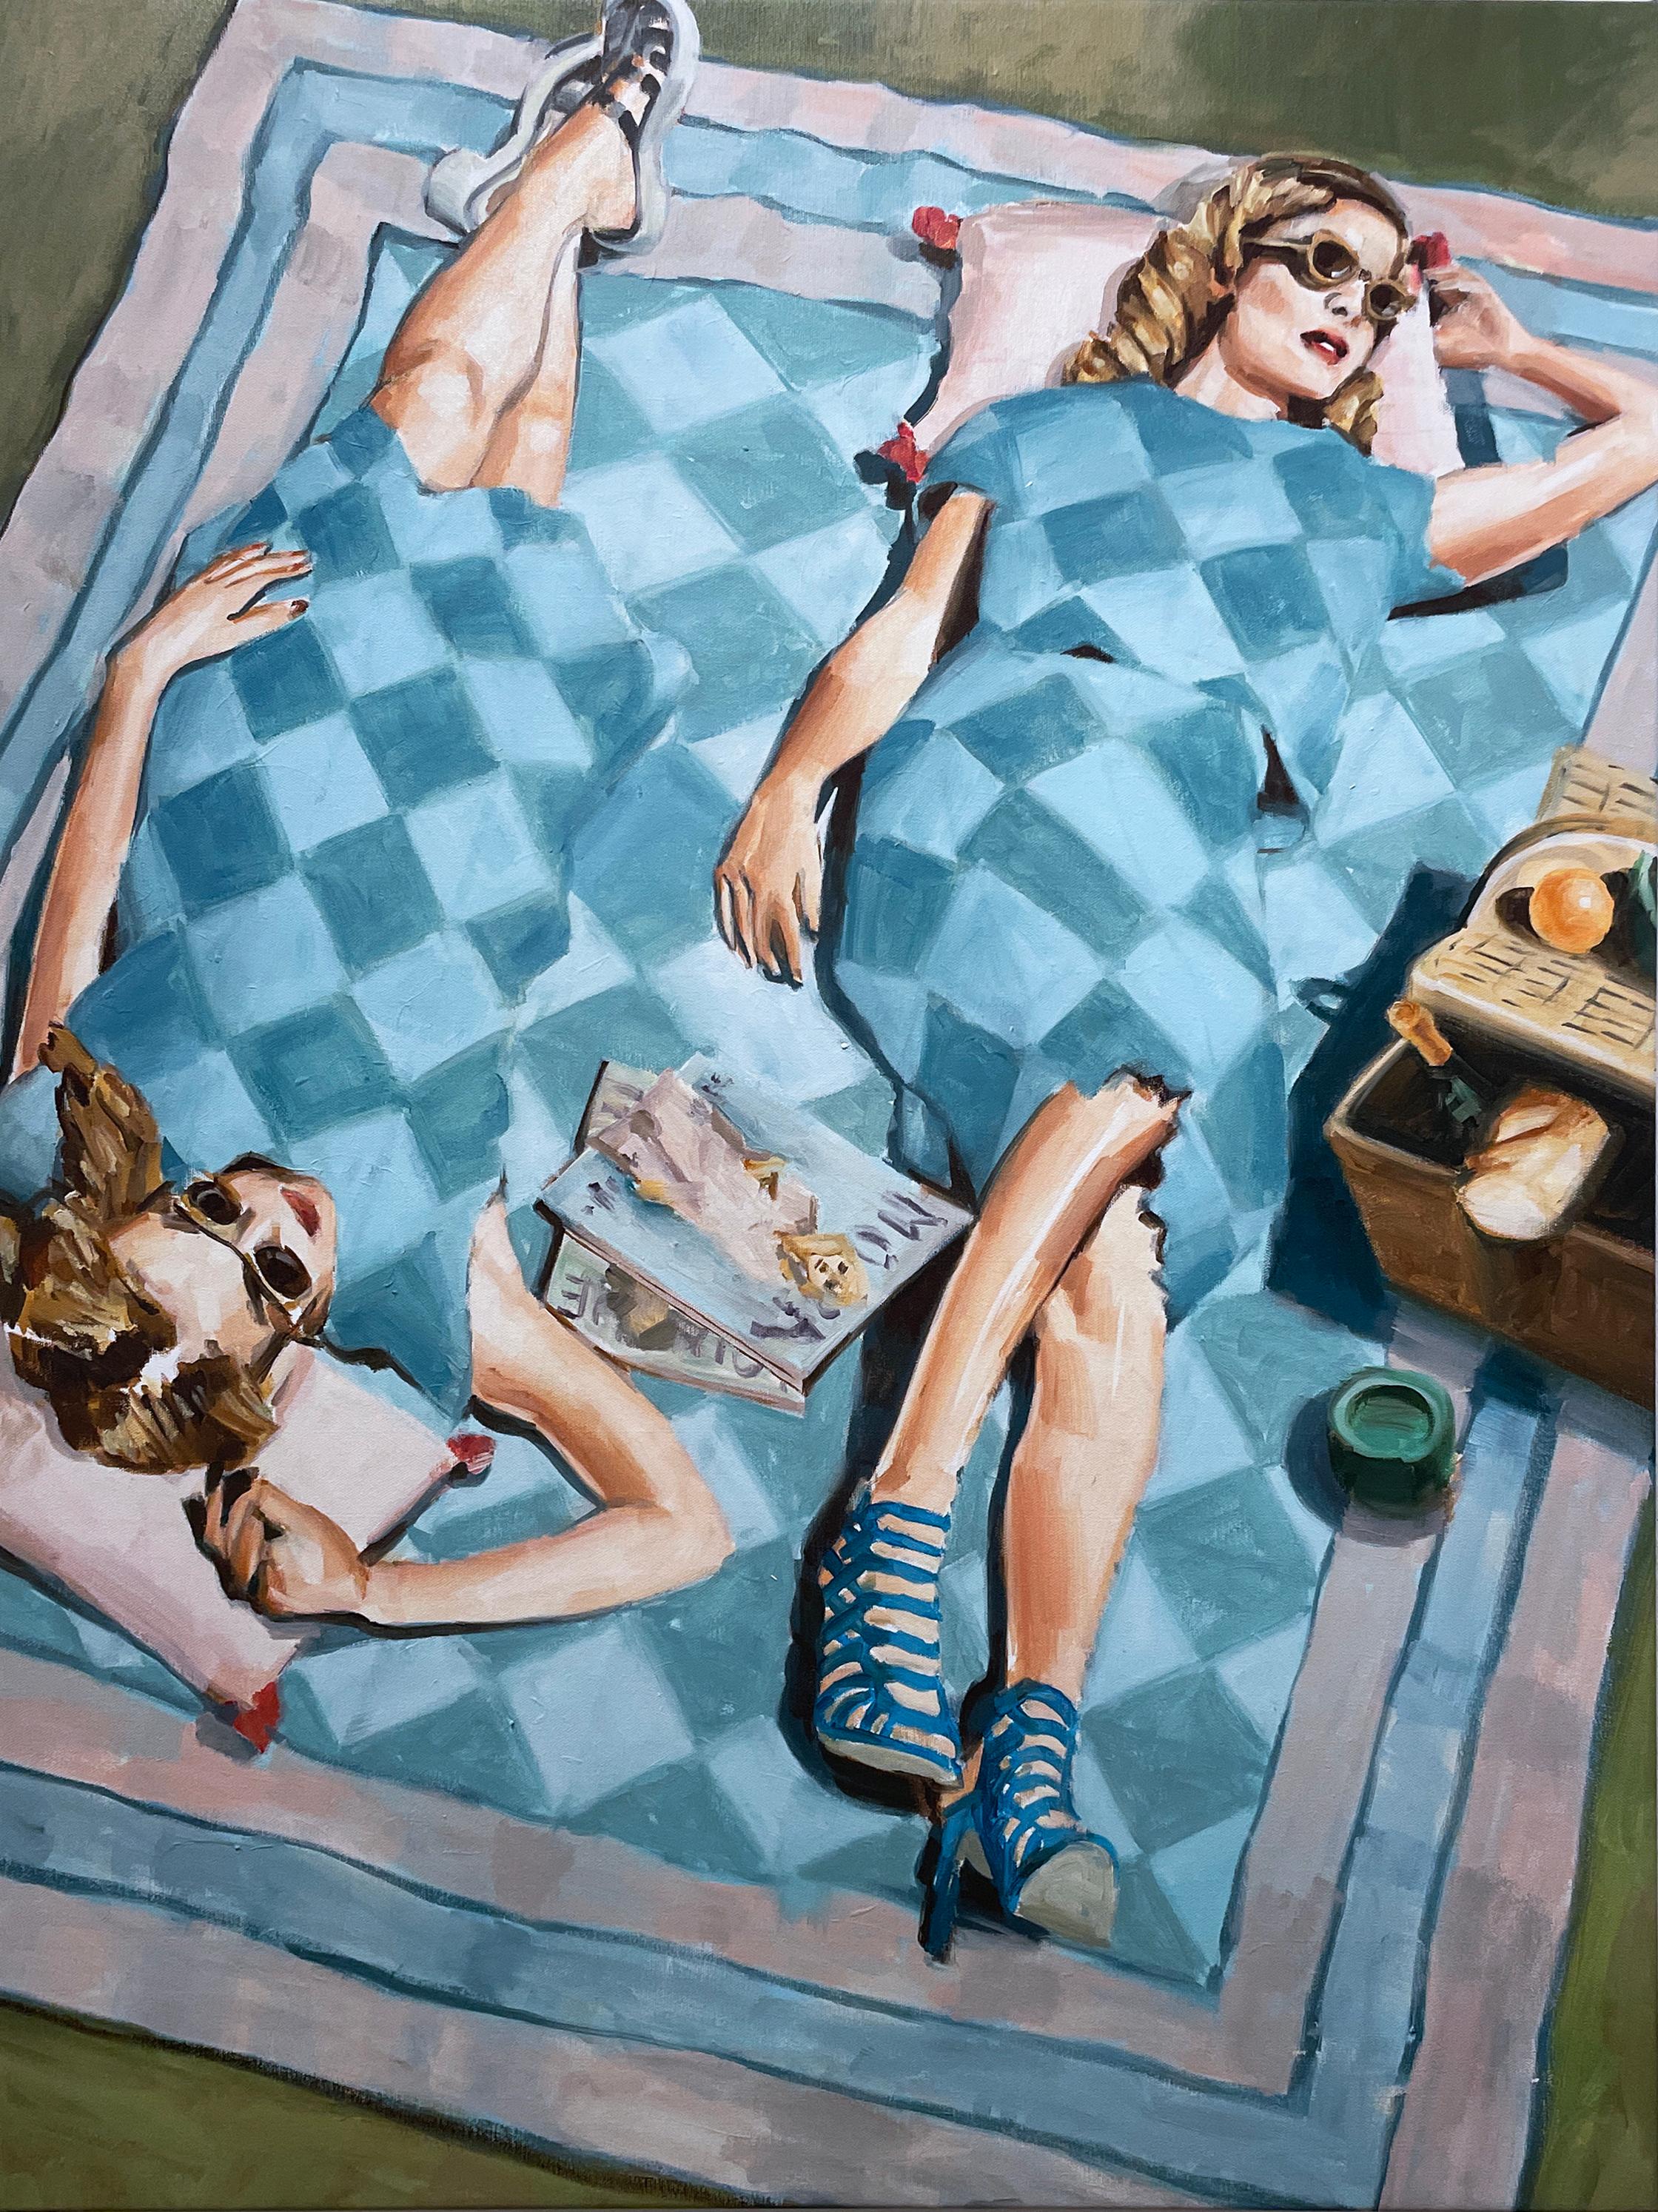 Style Picnic (2022) oil on canvas, figurative, lounging women, patterns, blue - Gray Portrait Painting by RU8ICON1